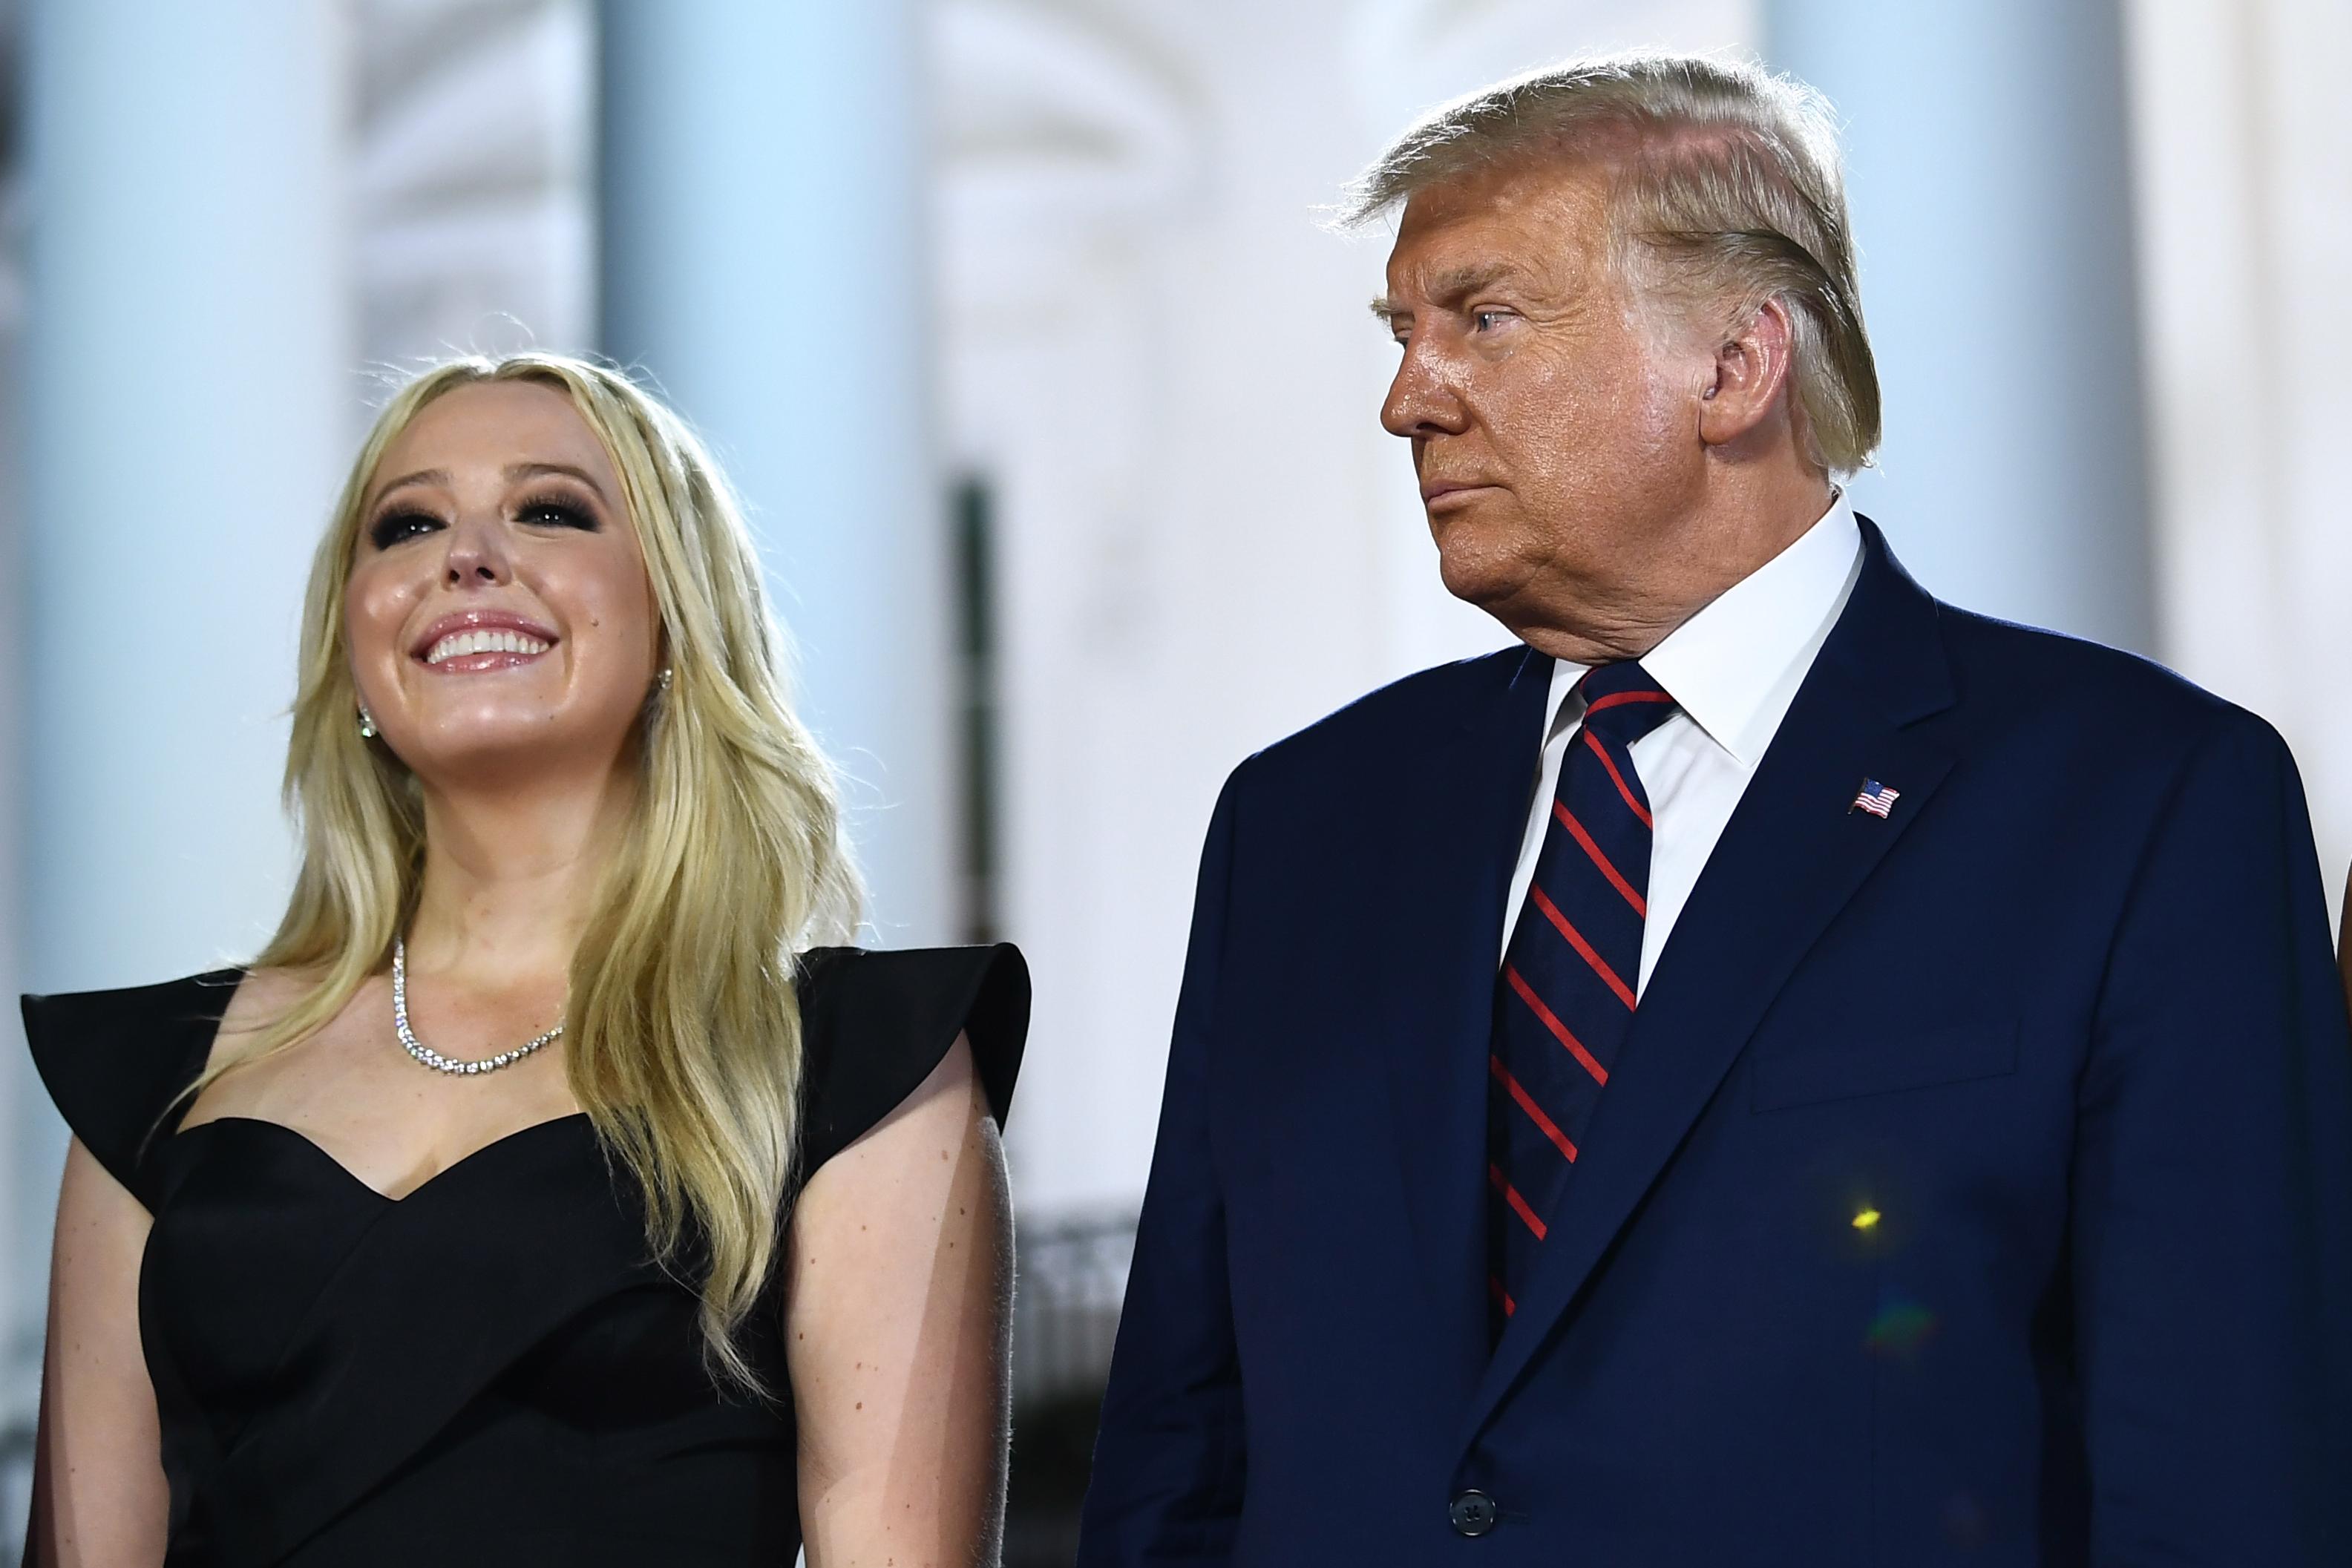 US President Donald Trump stands with daughter Tiffany Trump after he delivered his acceptance speech for the Republican Party nomination for reelection during the final day of the Republican National Convention at the South Lawn of the White House in Washington, DC on August 27, 2020. (Photo by Brendan Smialowski / AFP) (Photo by BRENDAN SMIALOWSKI/AFP via Getty Images)